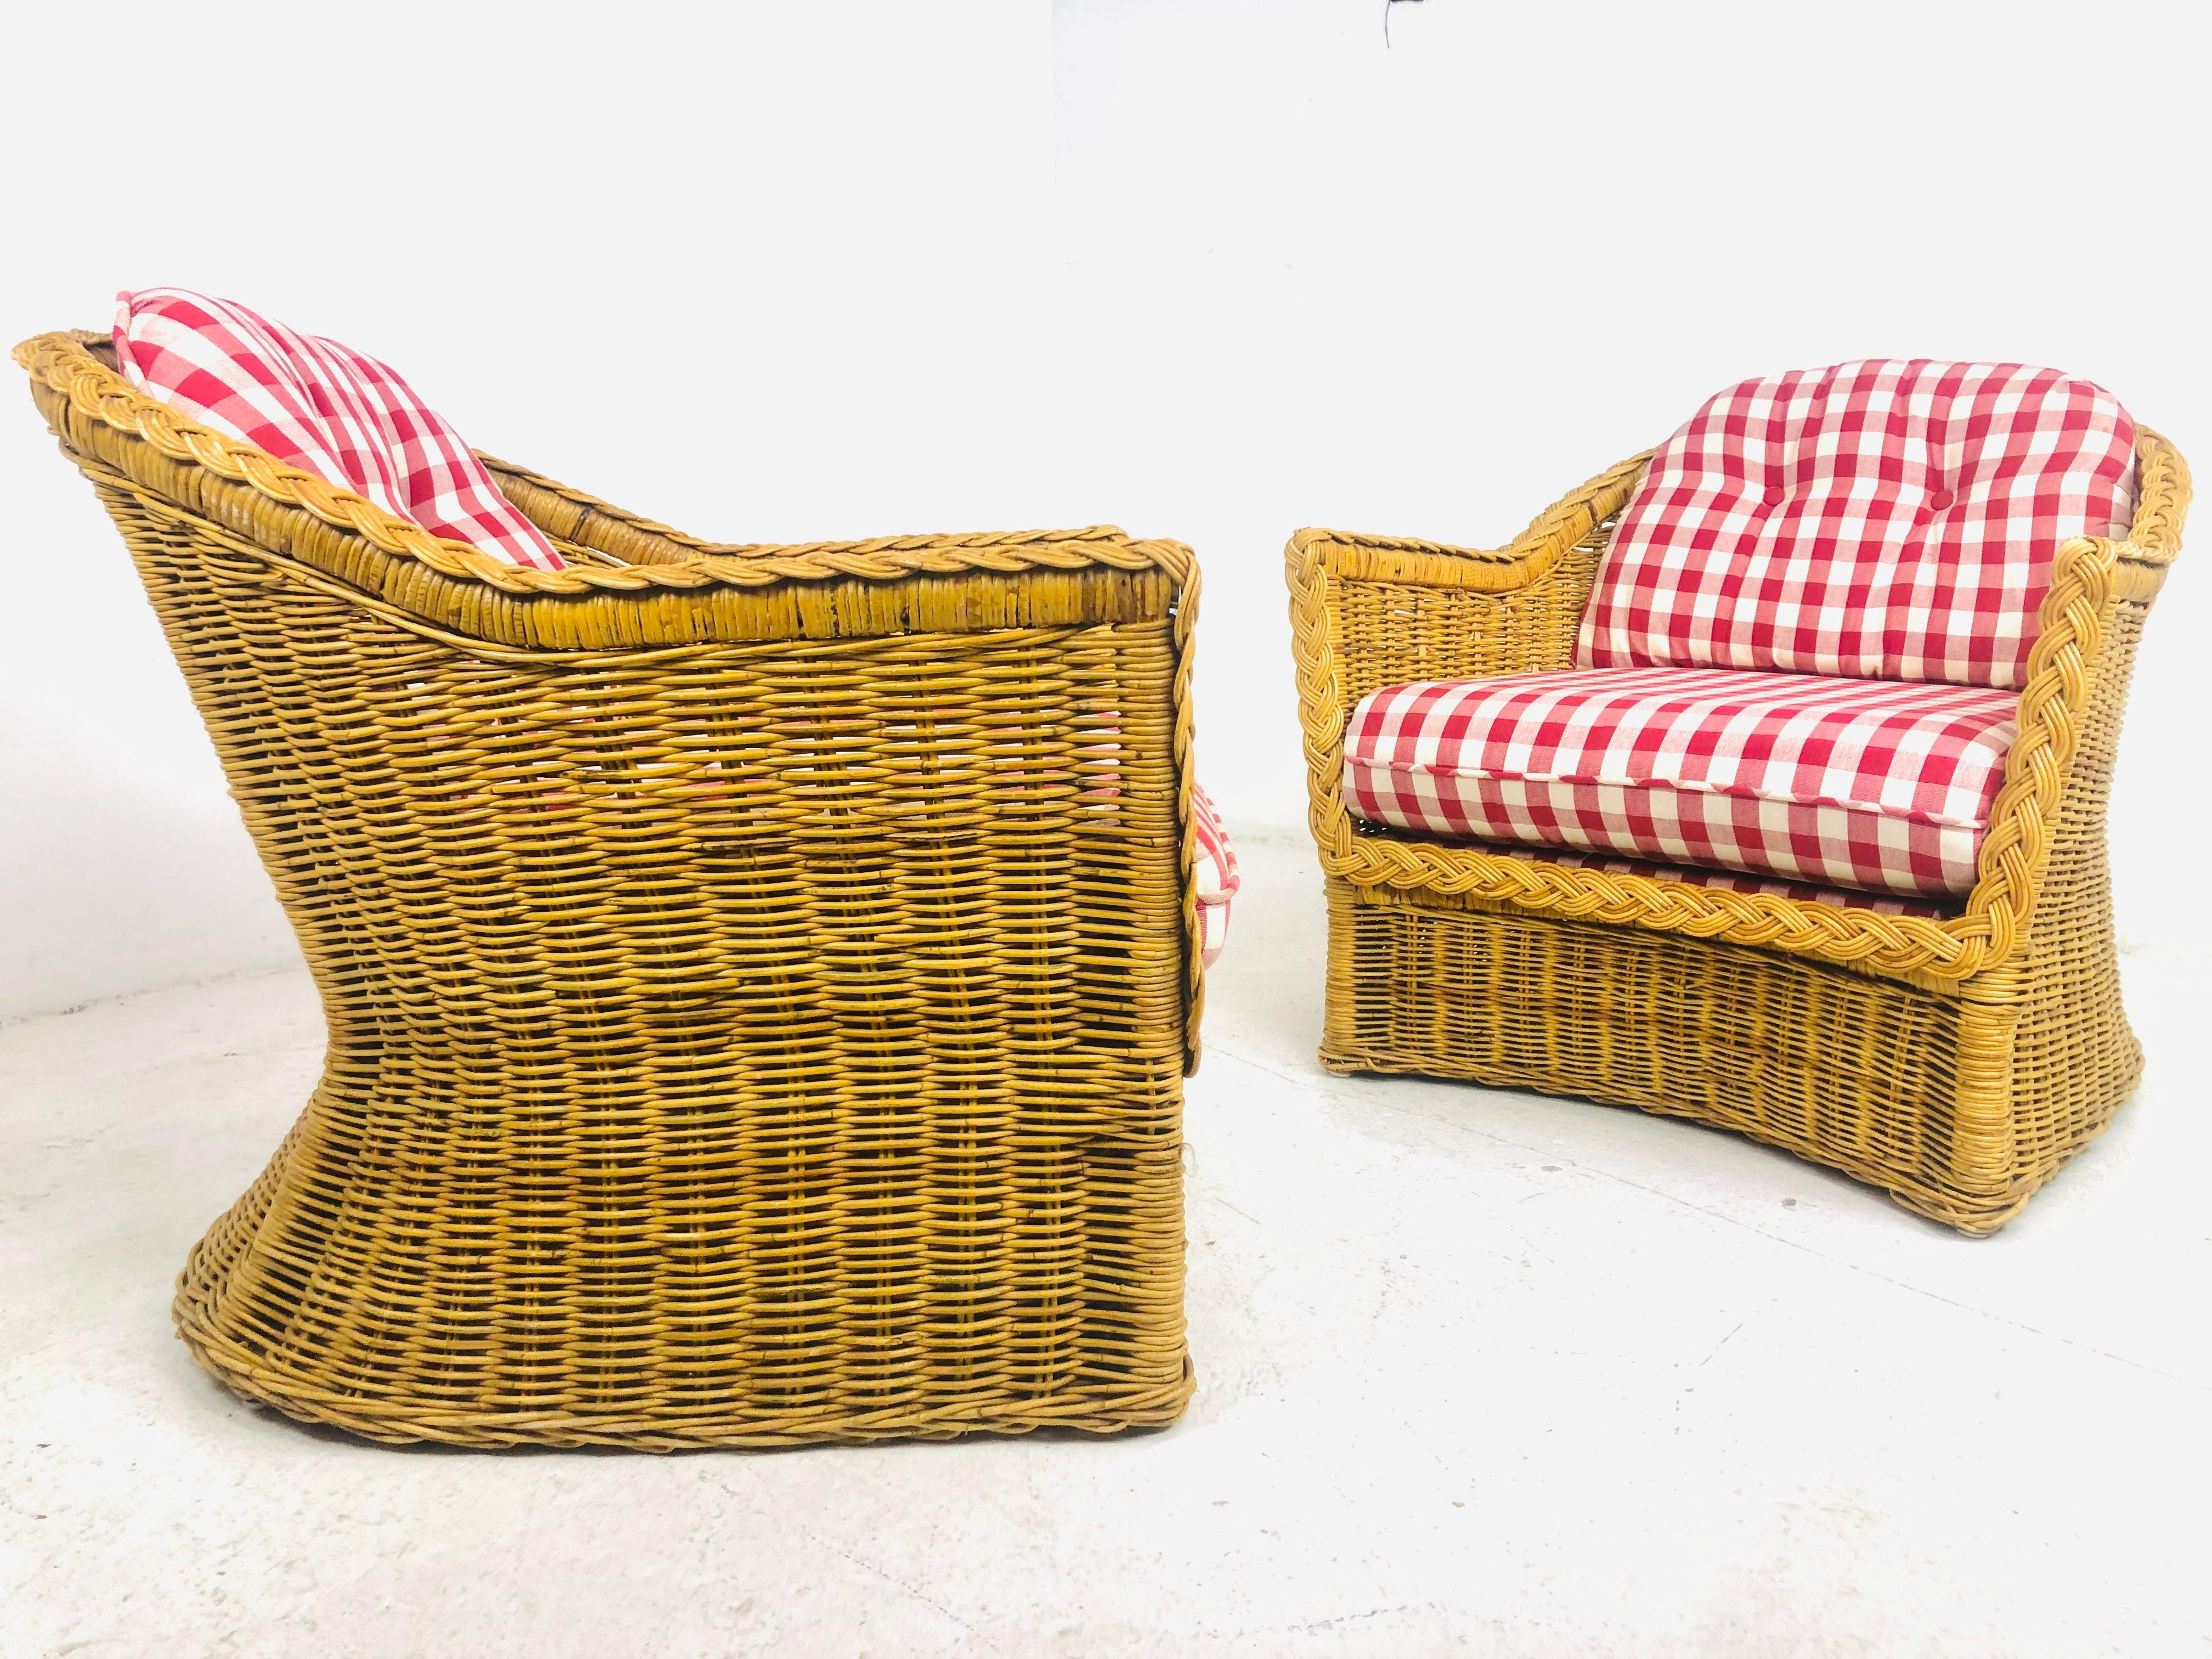 Upholstery Braided Rattan Living Room Set by Wicker Works